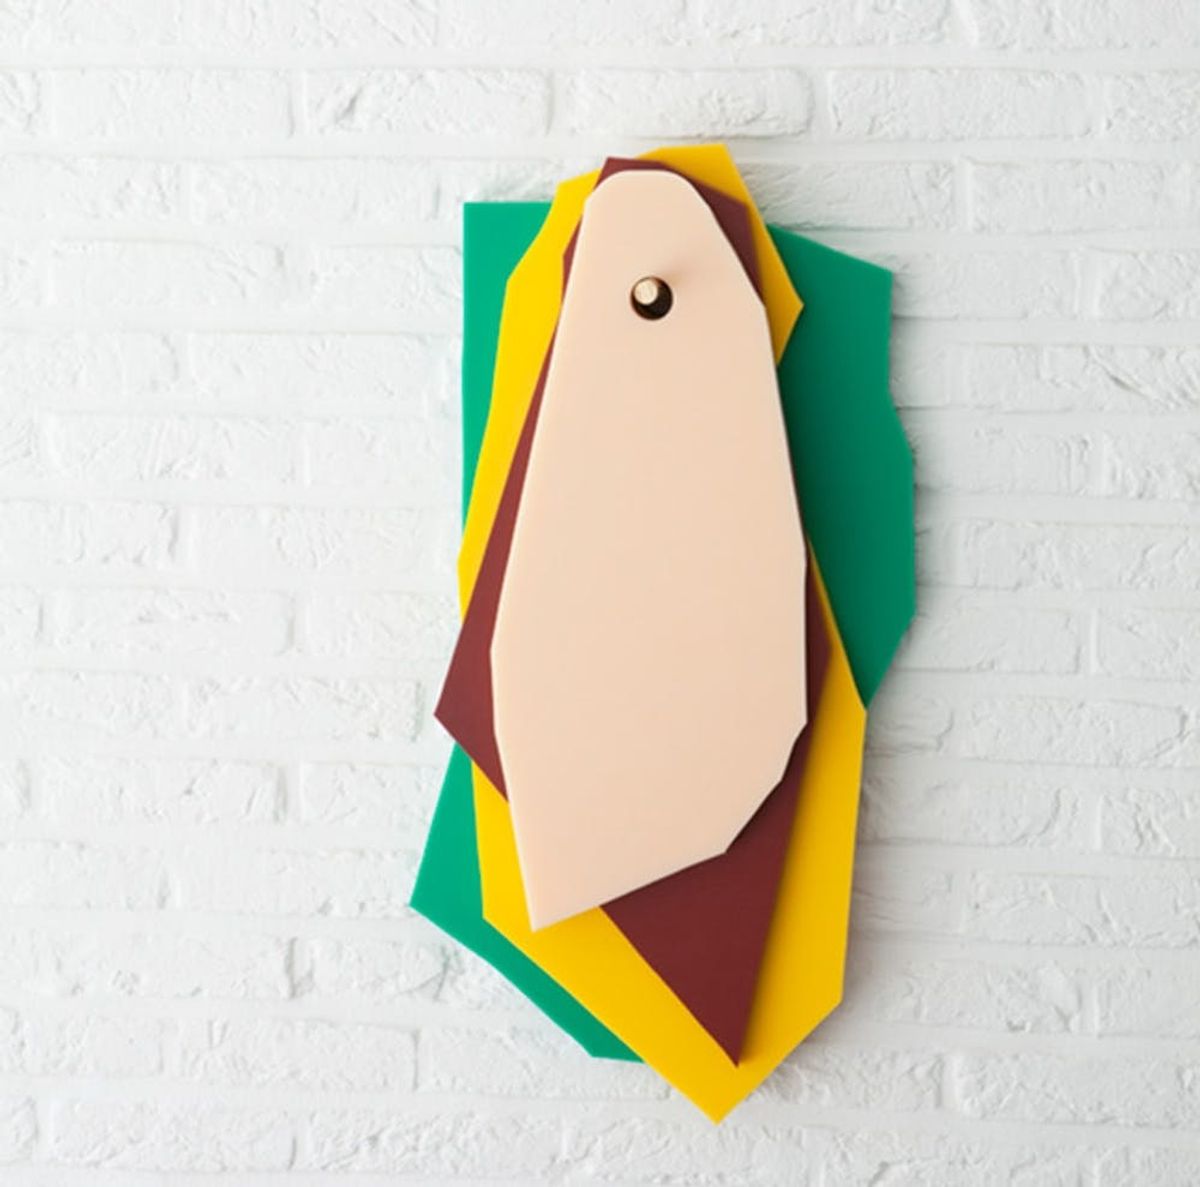 Chop To It: 22 Cutting Boards With Creative Flair